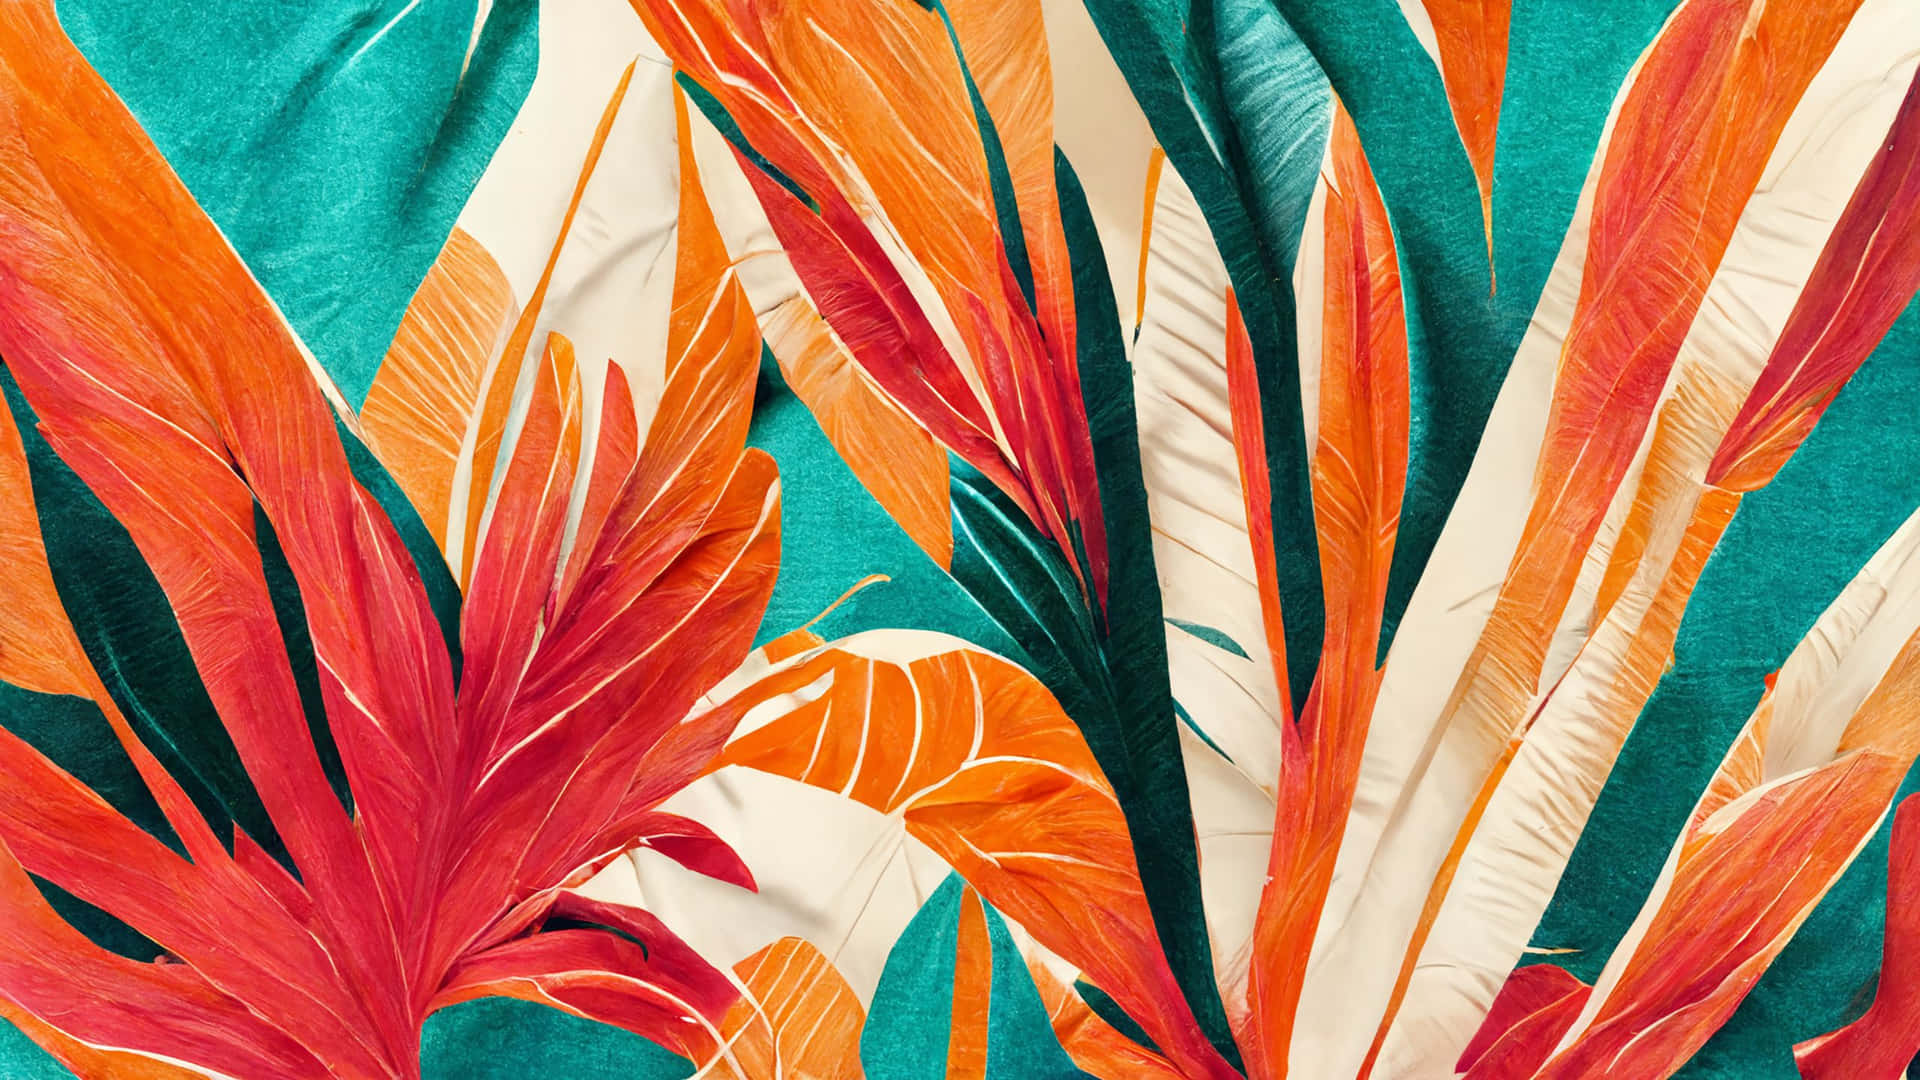 Refresh Your Desktop With This Plant Aesthetic. Background